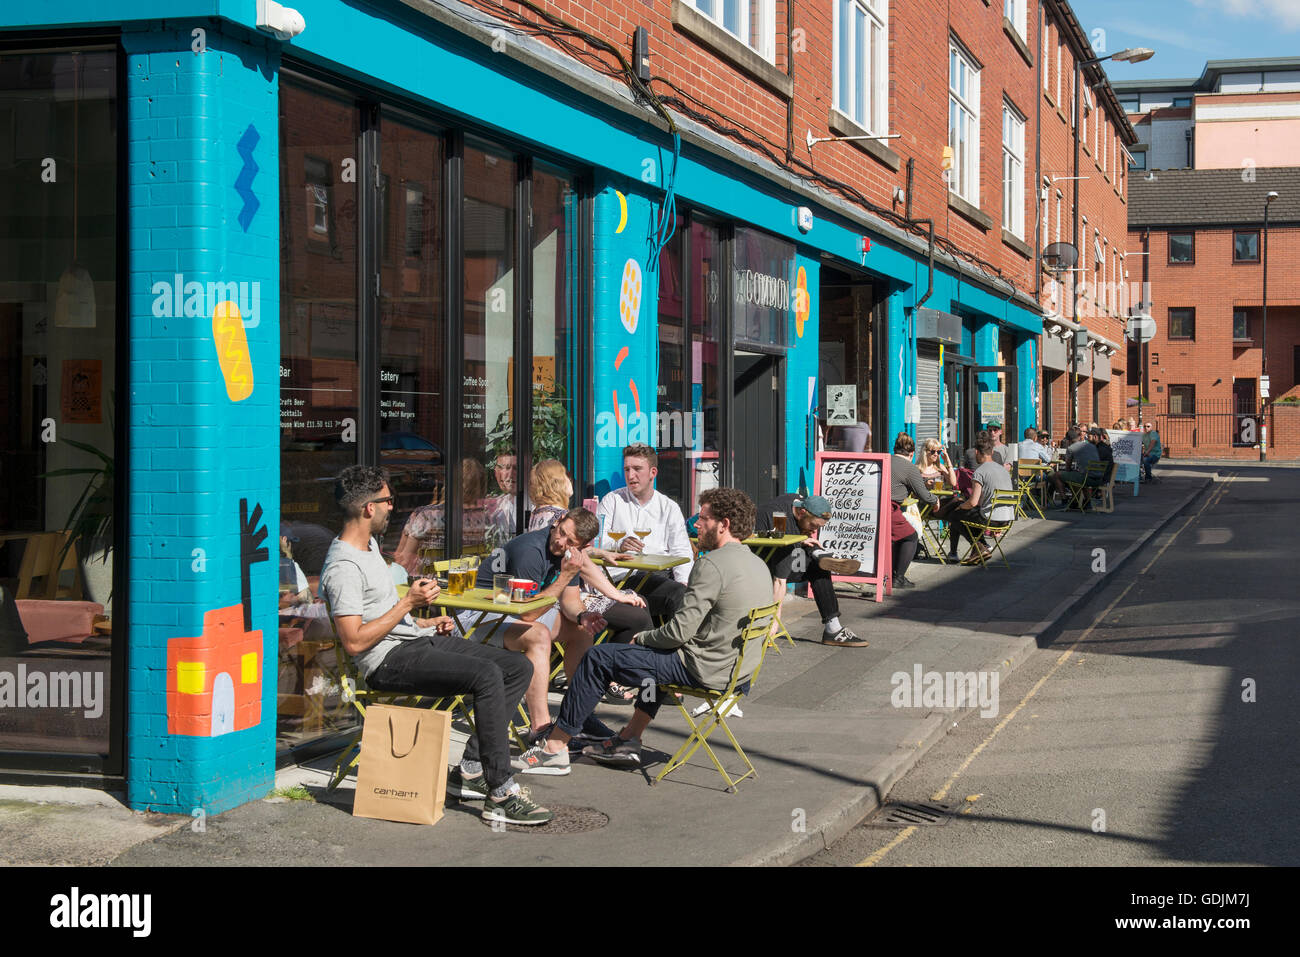 People enjoying a drink outside Common bar located on Edge Street in the Northern Quarter area of Manchester. Stock Photo